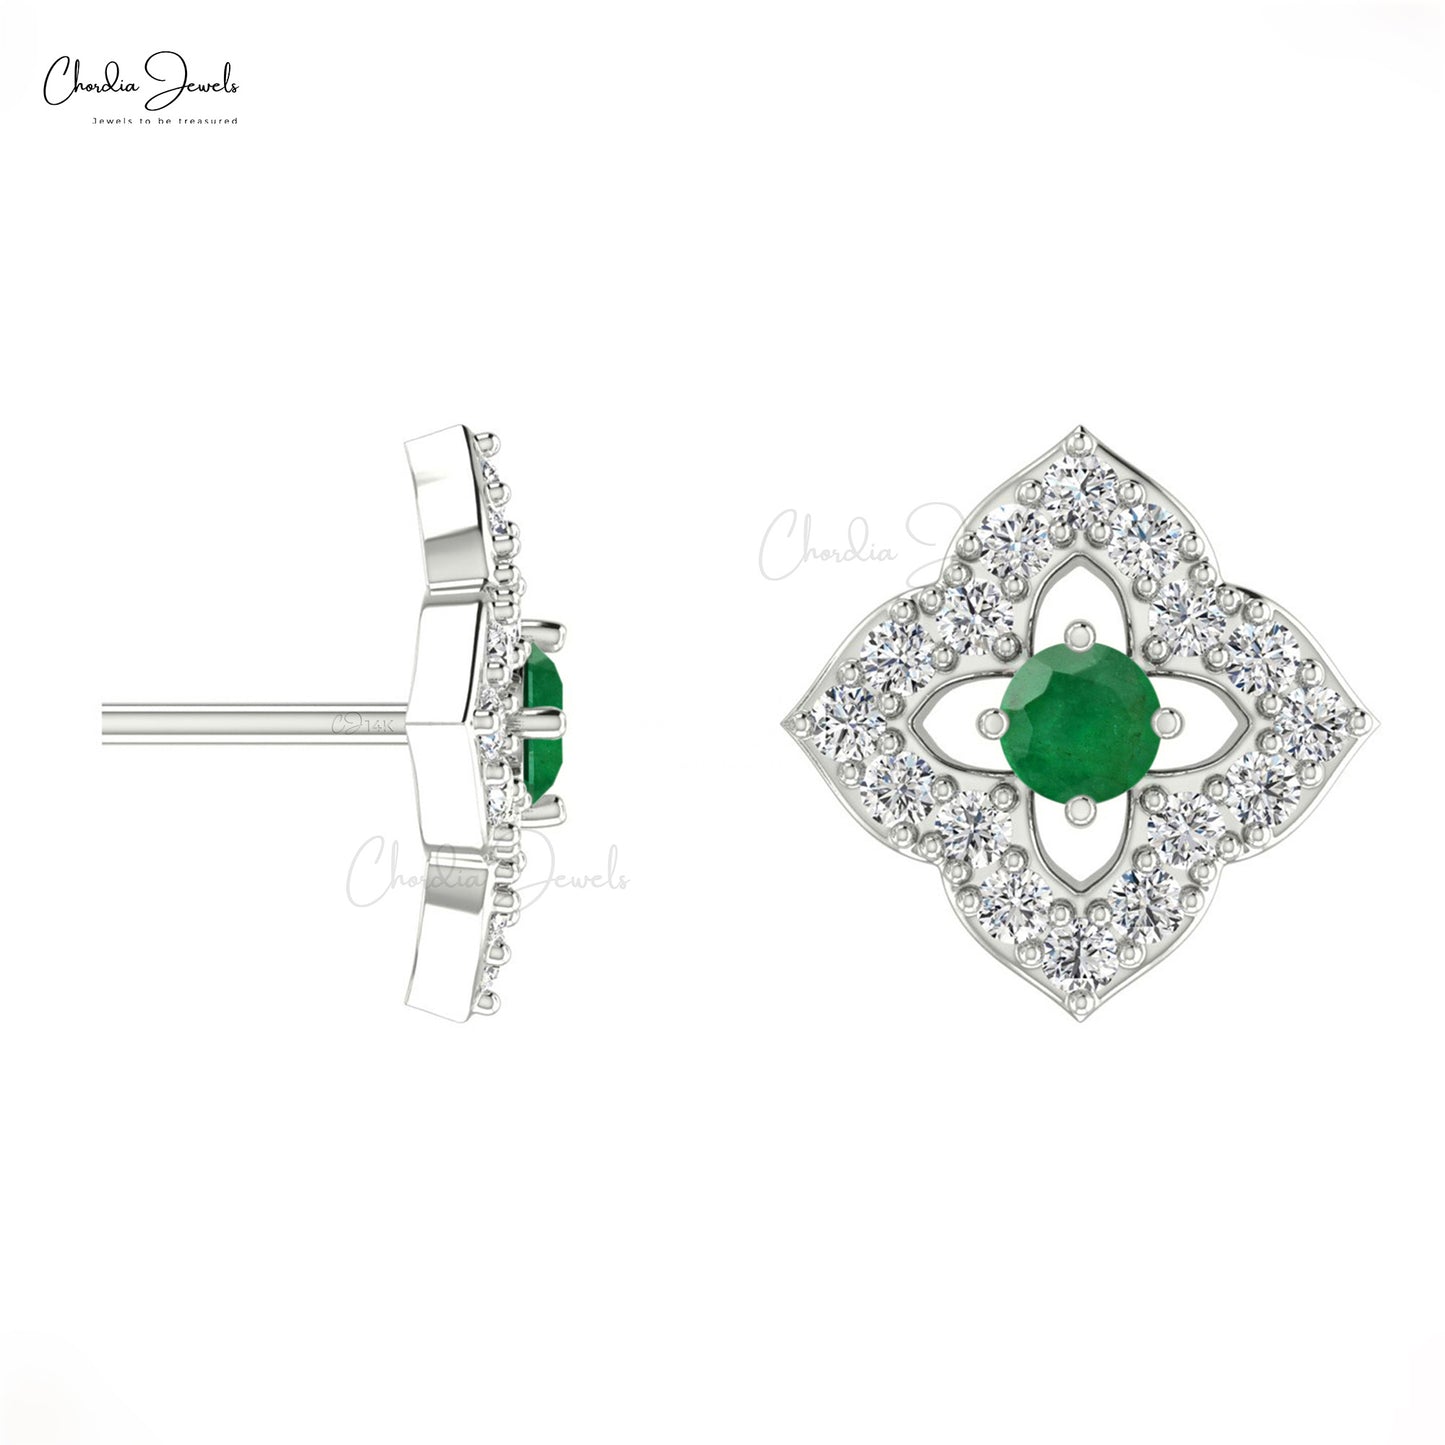 Discover the perfect blend of style with these diamond accents stud earrings.